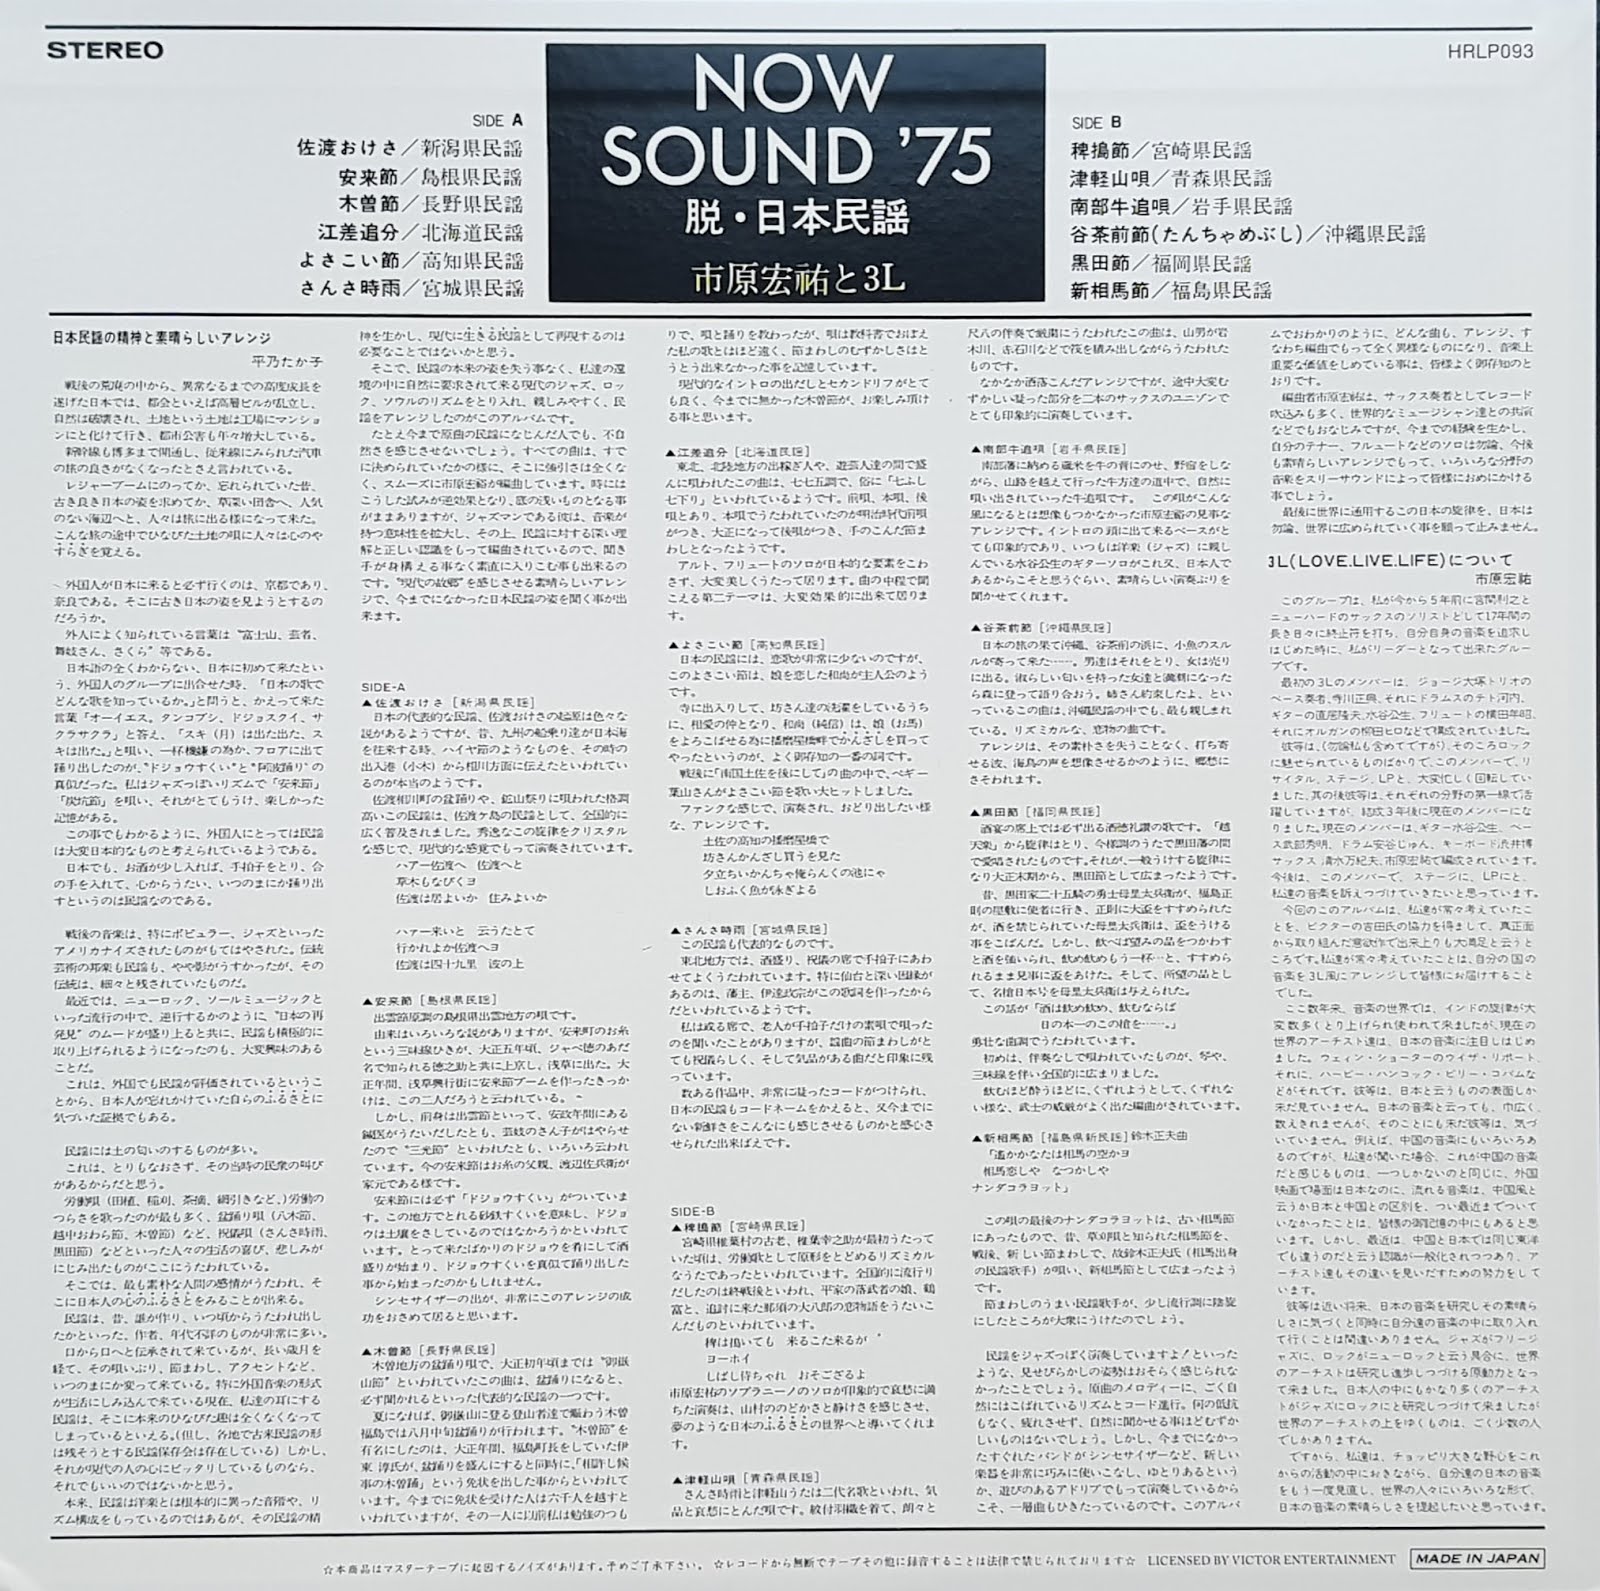 Progressive Music Reviews Now Sound By Love Live Life And Kosuke Ishihara From 1975